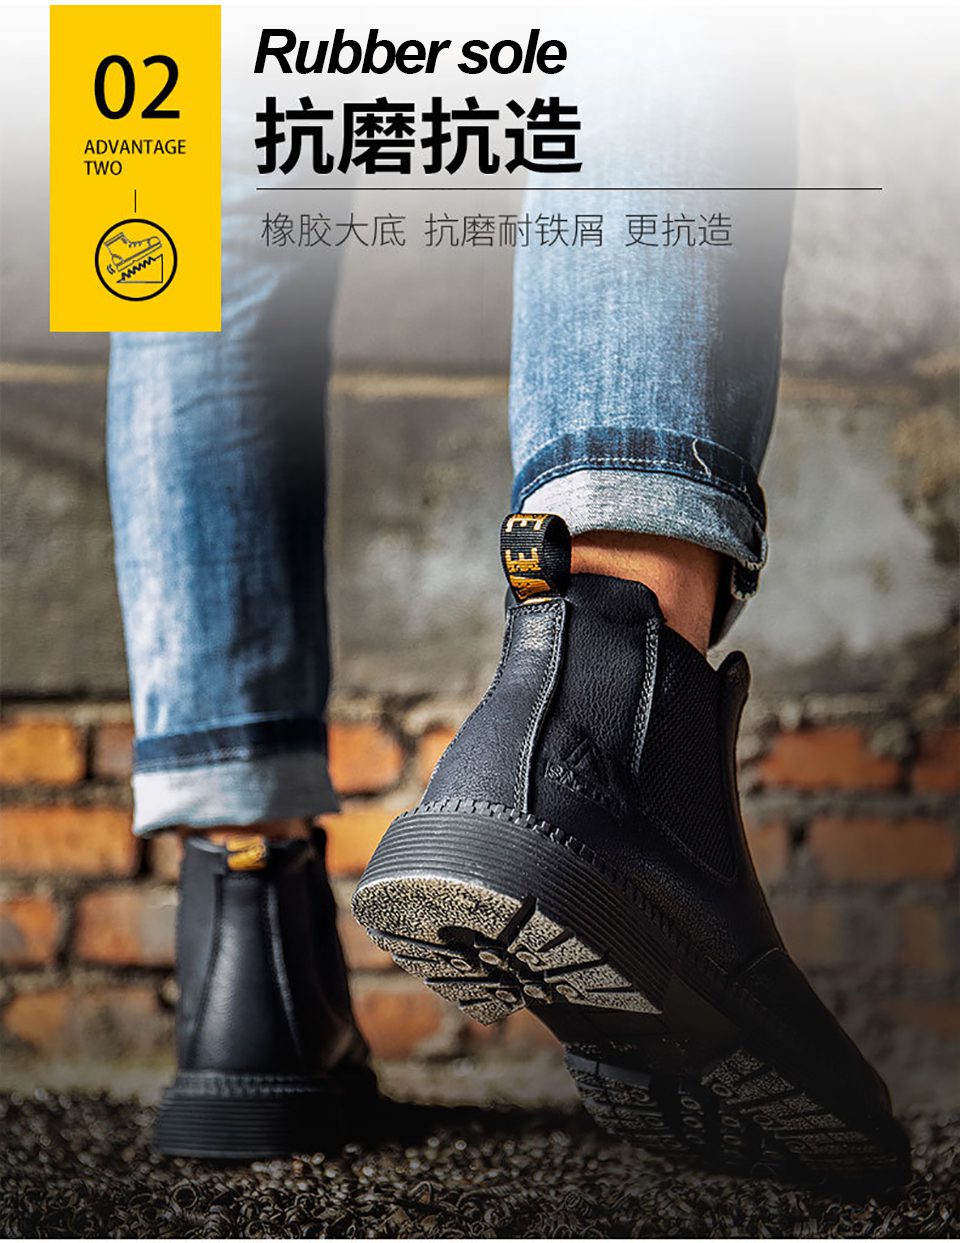 GRITION Unisex Work Shoes Steel Toe Waterproof Safety Shoes Anti-smash Anti-puncture Non Slip Durable Lightweight Chelsea Boots